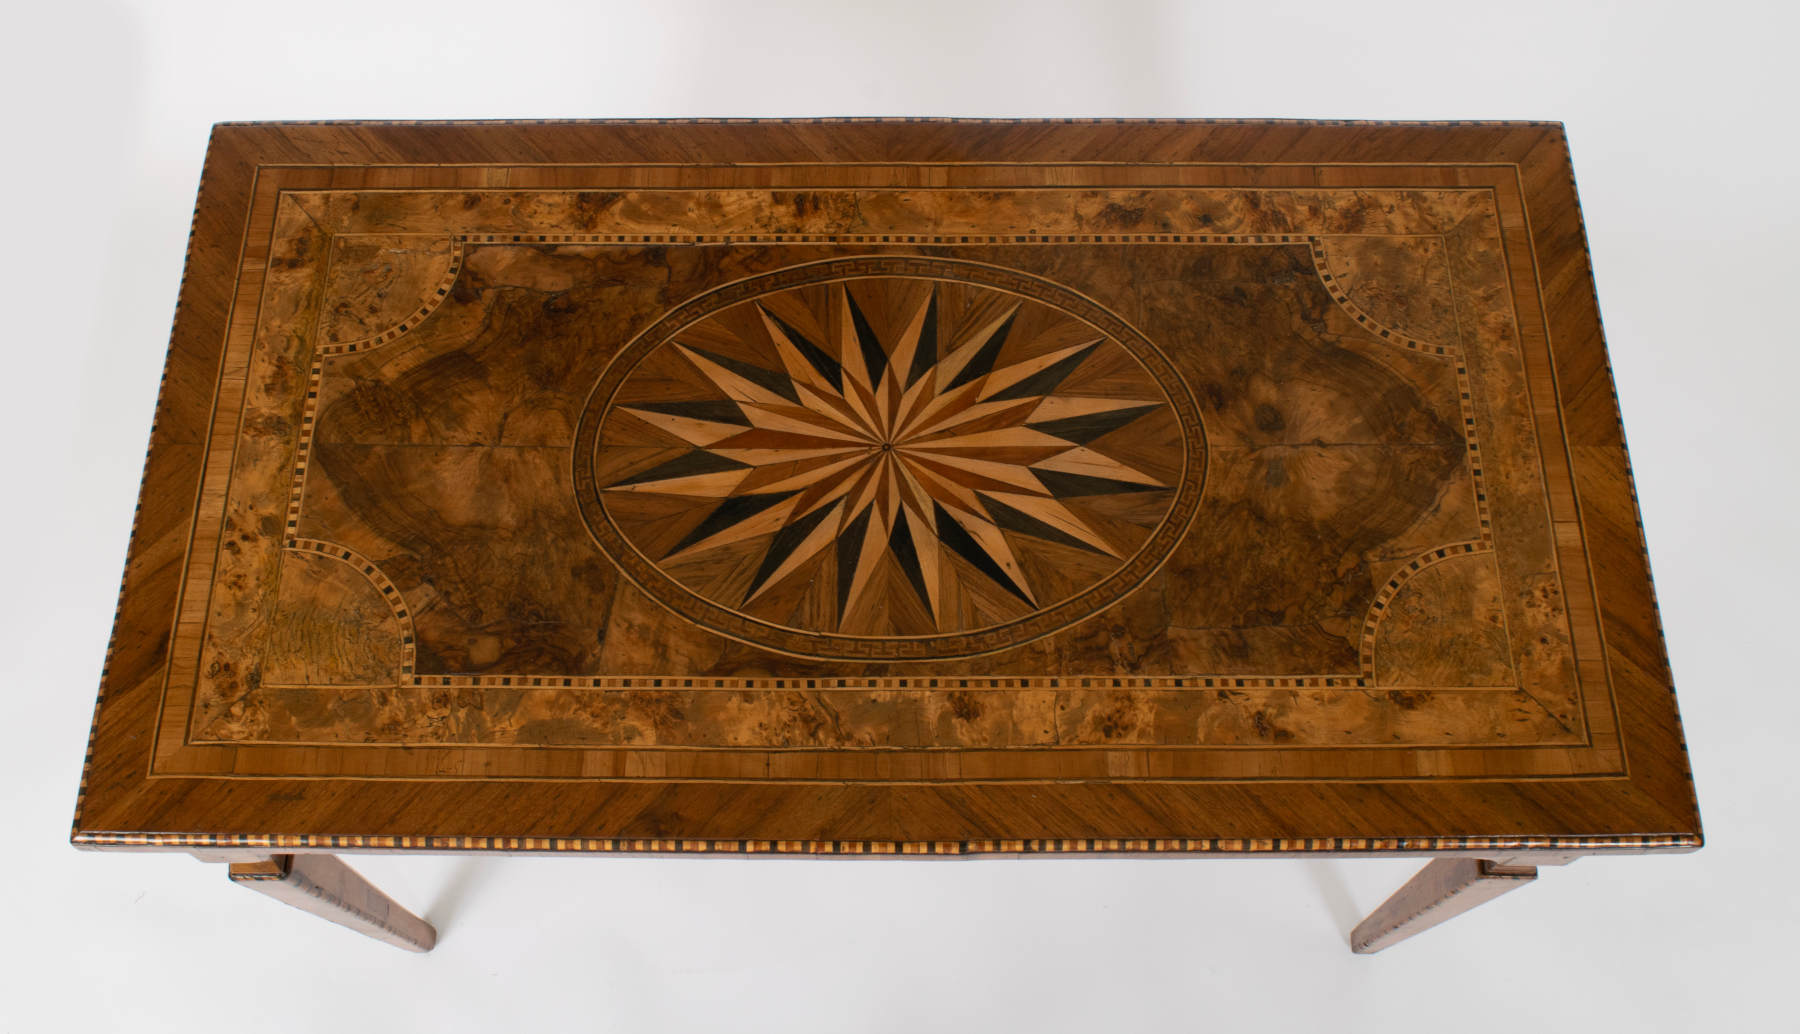 Pair of Italian Parquetry Side Tables, c. 1780